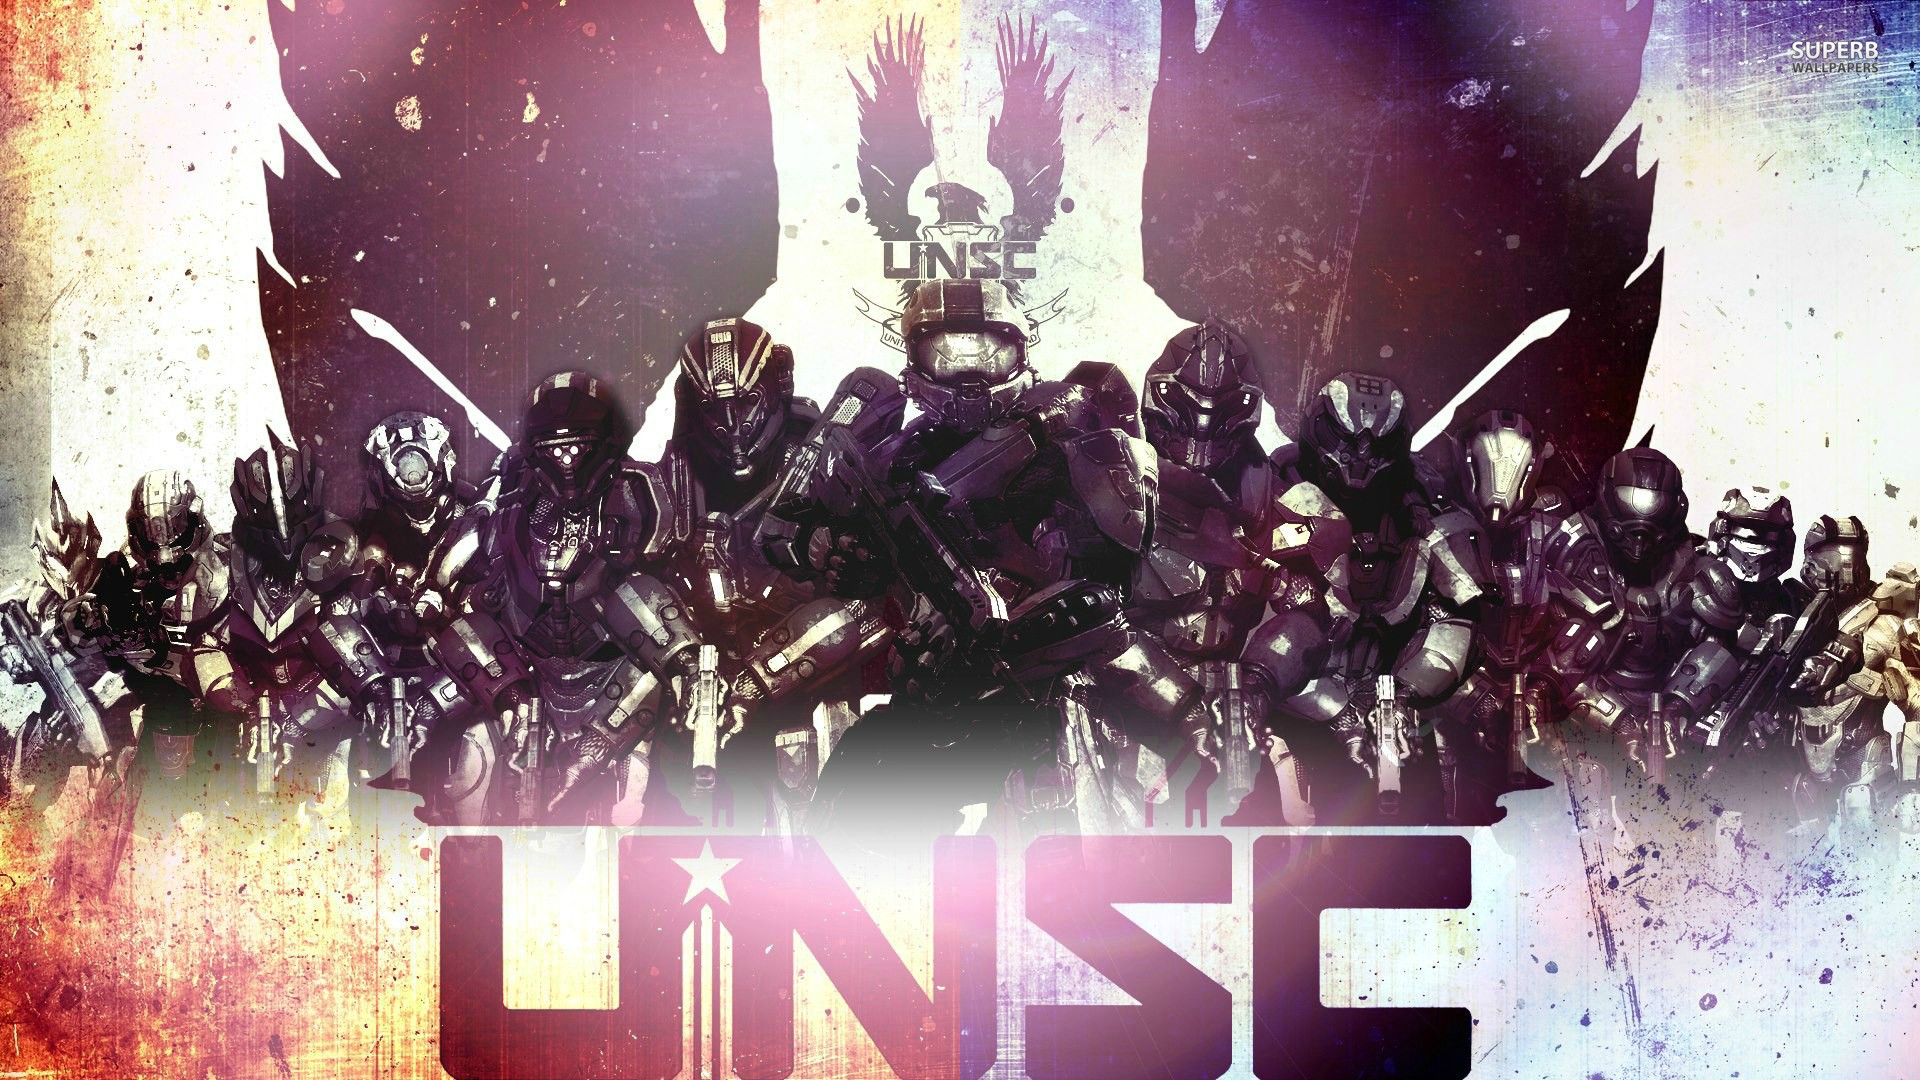 Video Games UNSC Infinity Halo Halo 4 343 Industries Master Chief UNSC Military Spartans Halo 1920x1080